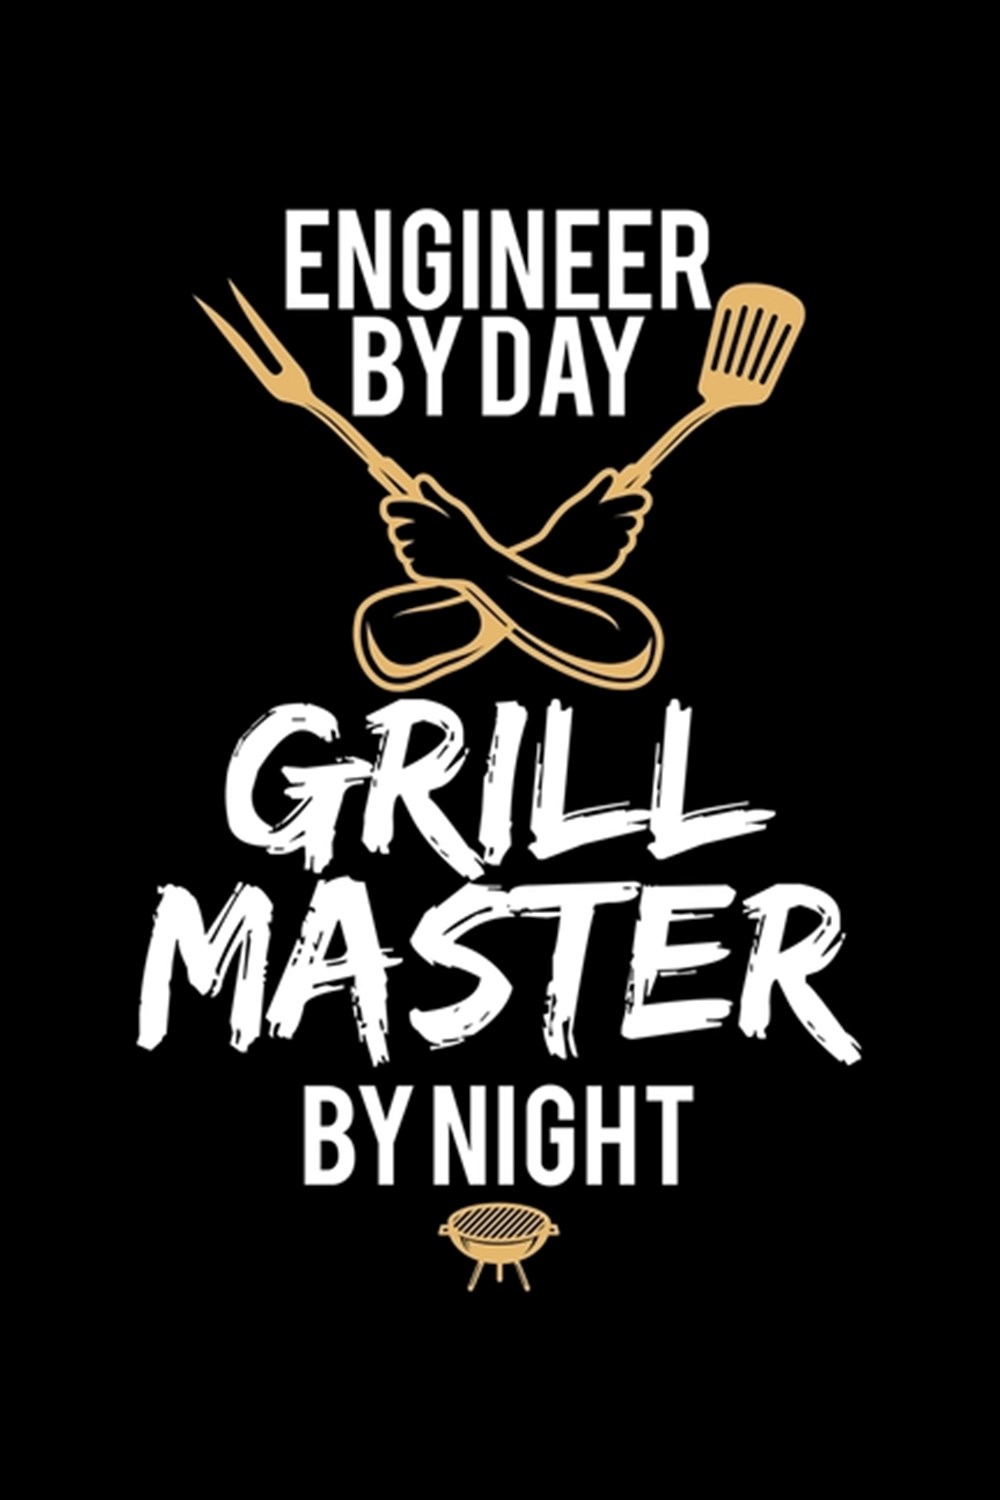 Engineer By Day Grill Master By Night Blank Cookbook Journal to Write in Recipes and Notes to Create